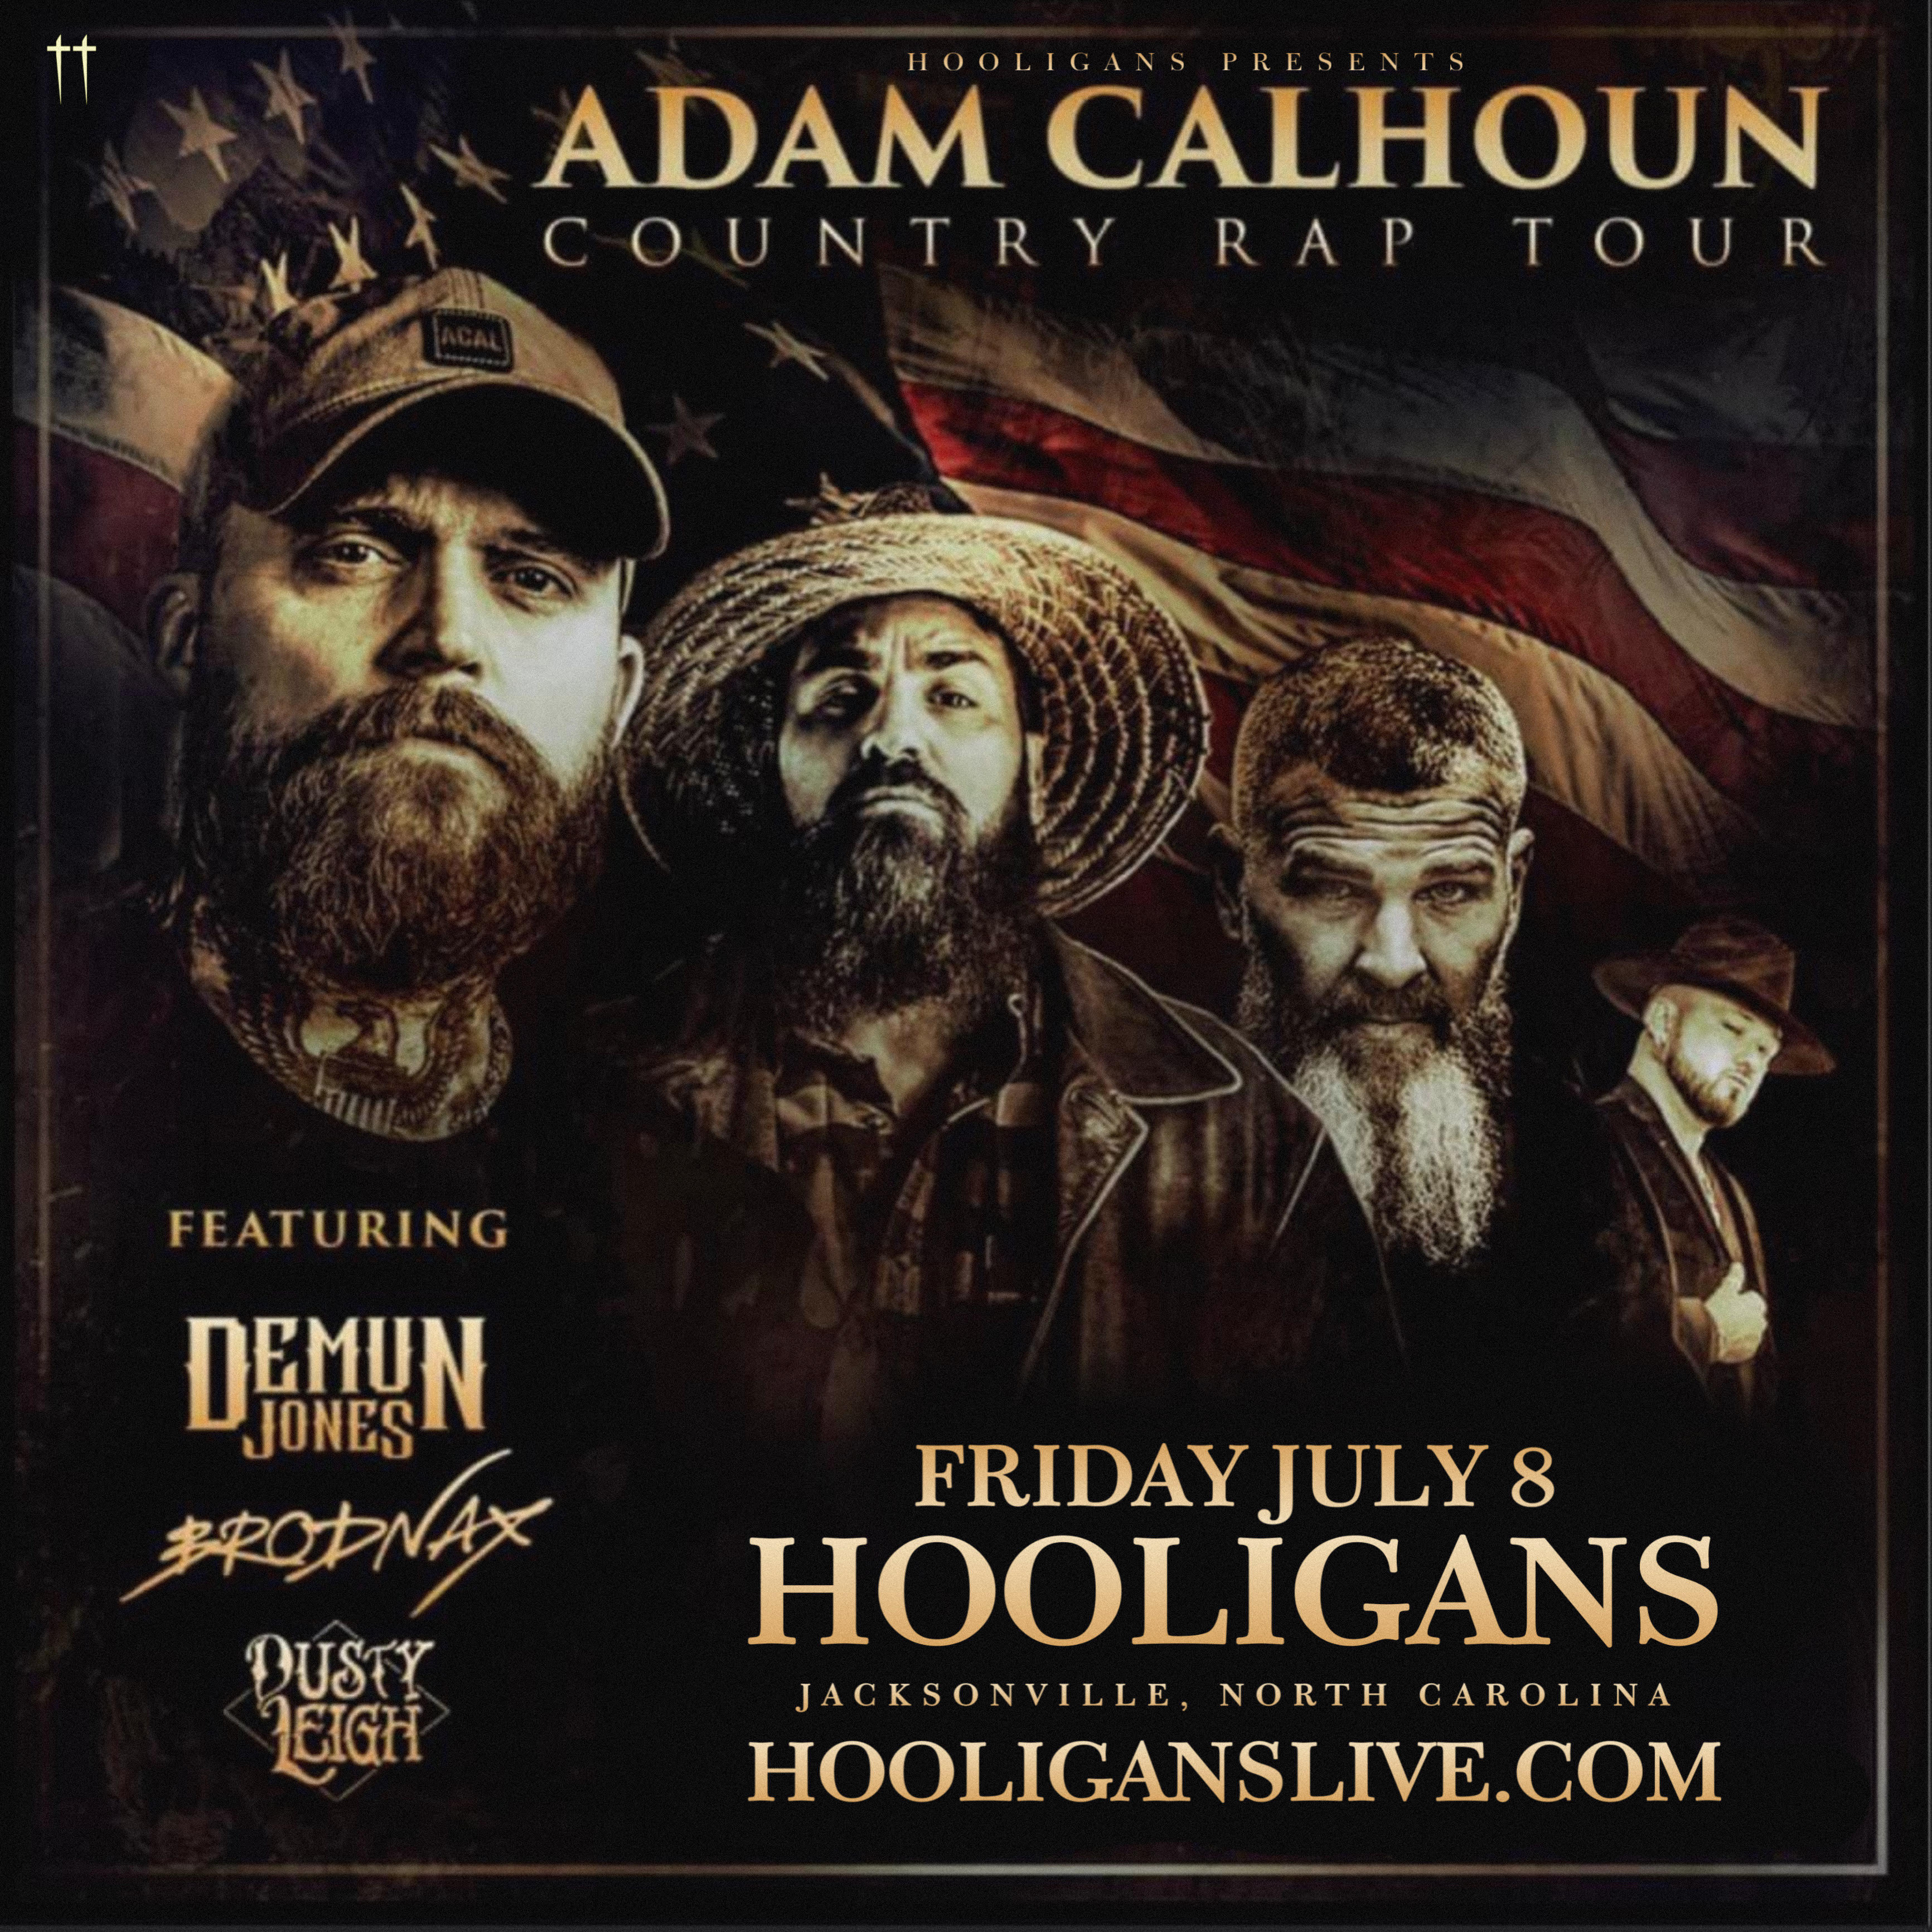 Buy Tickets to Adam Calhoun Country Rap Tour in Jacksonville on Jul 08